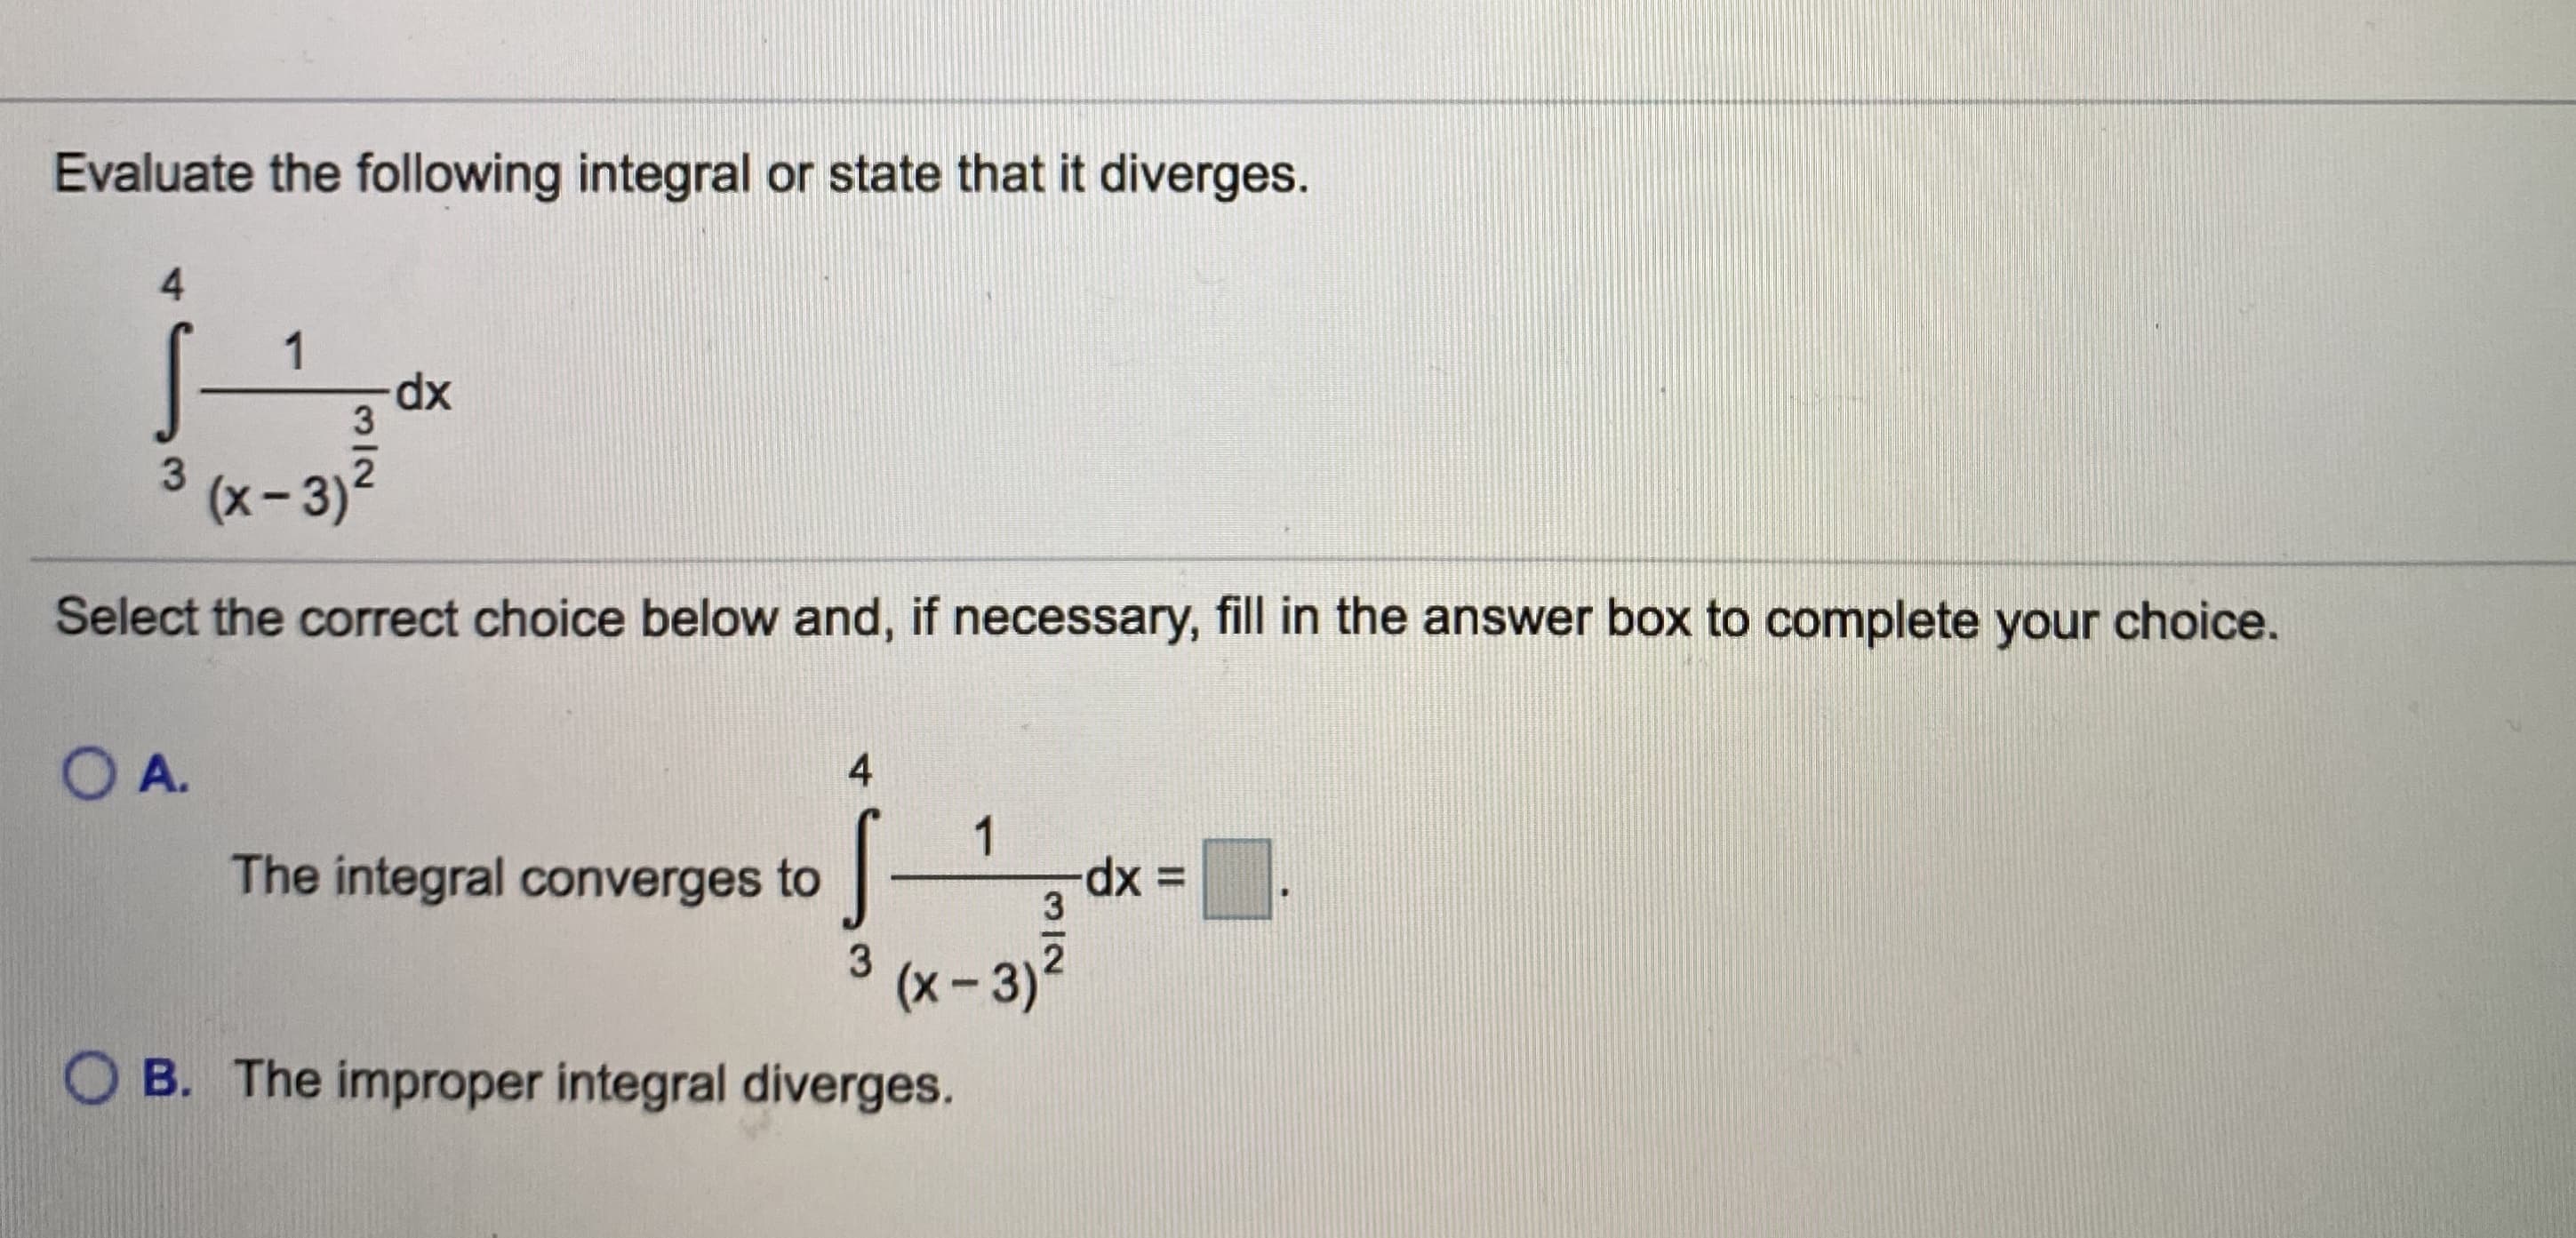 Evaluate the following integral or state that it diverges.
1
3
(x- 3)2
